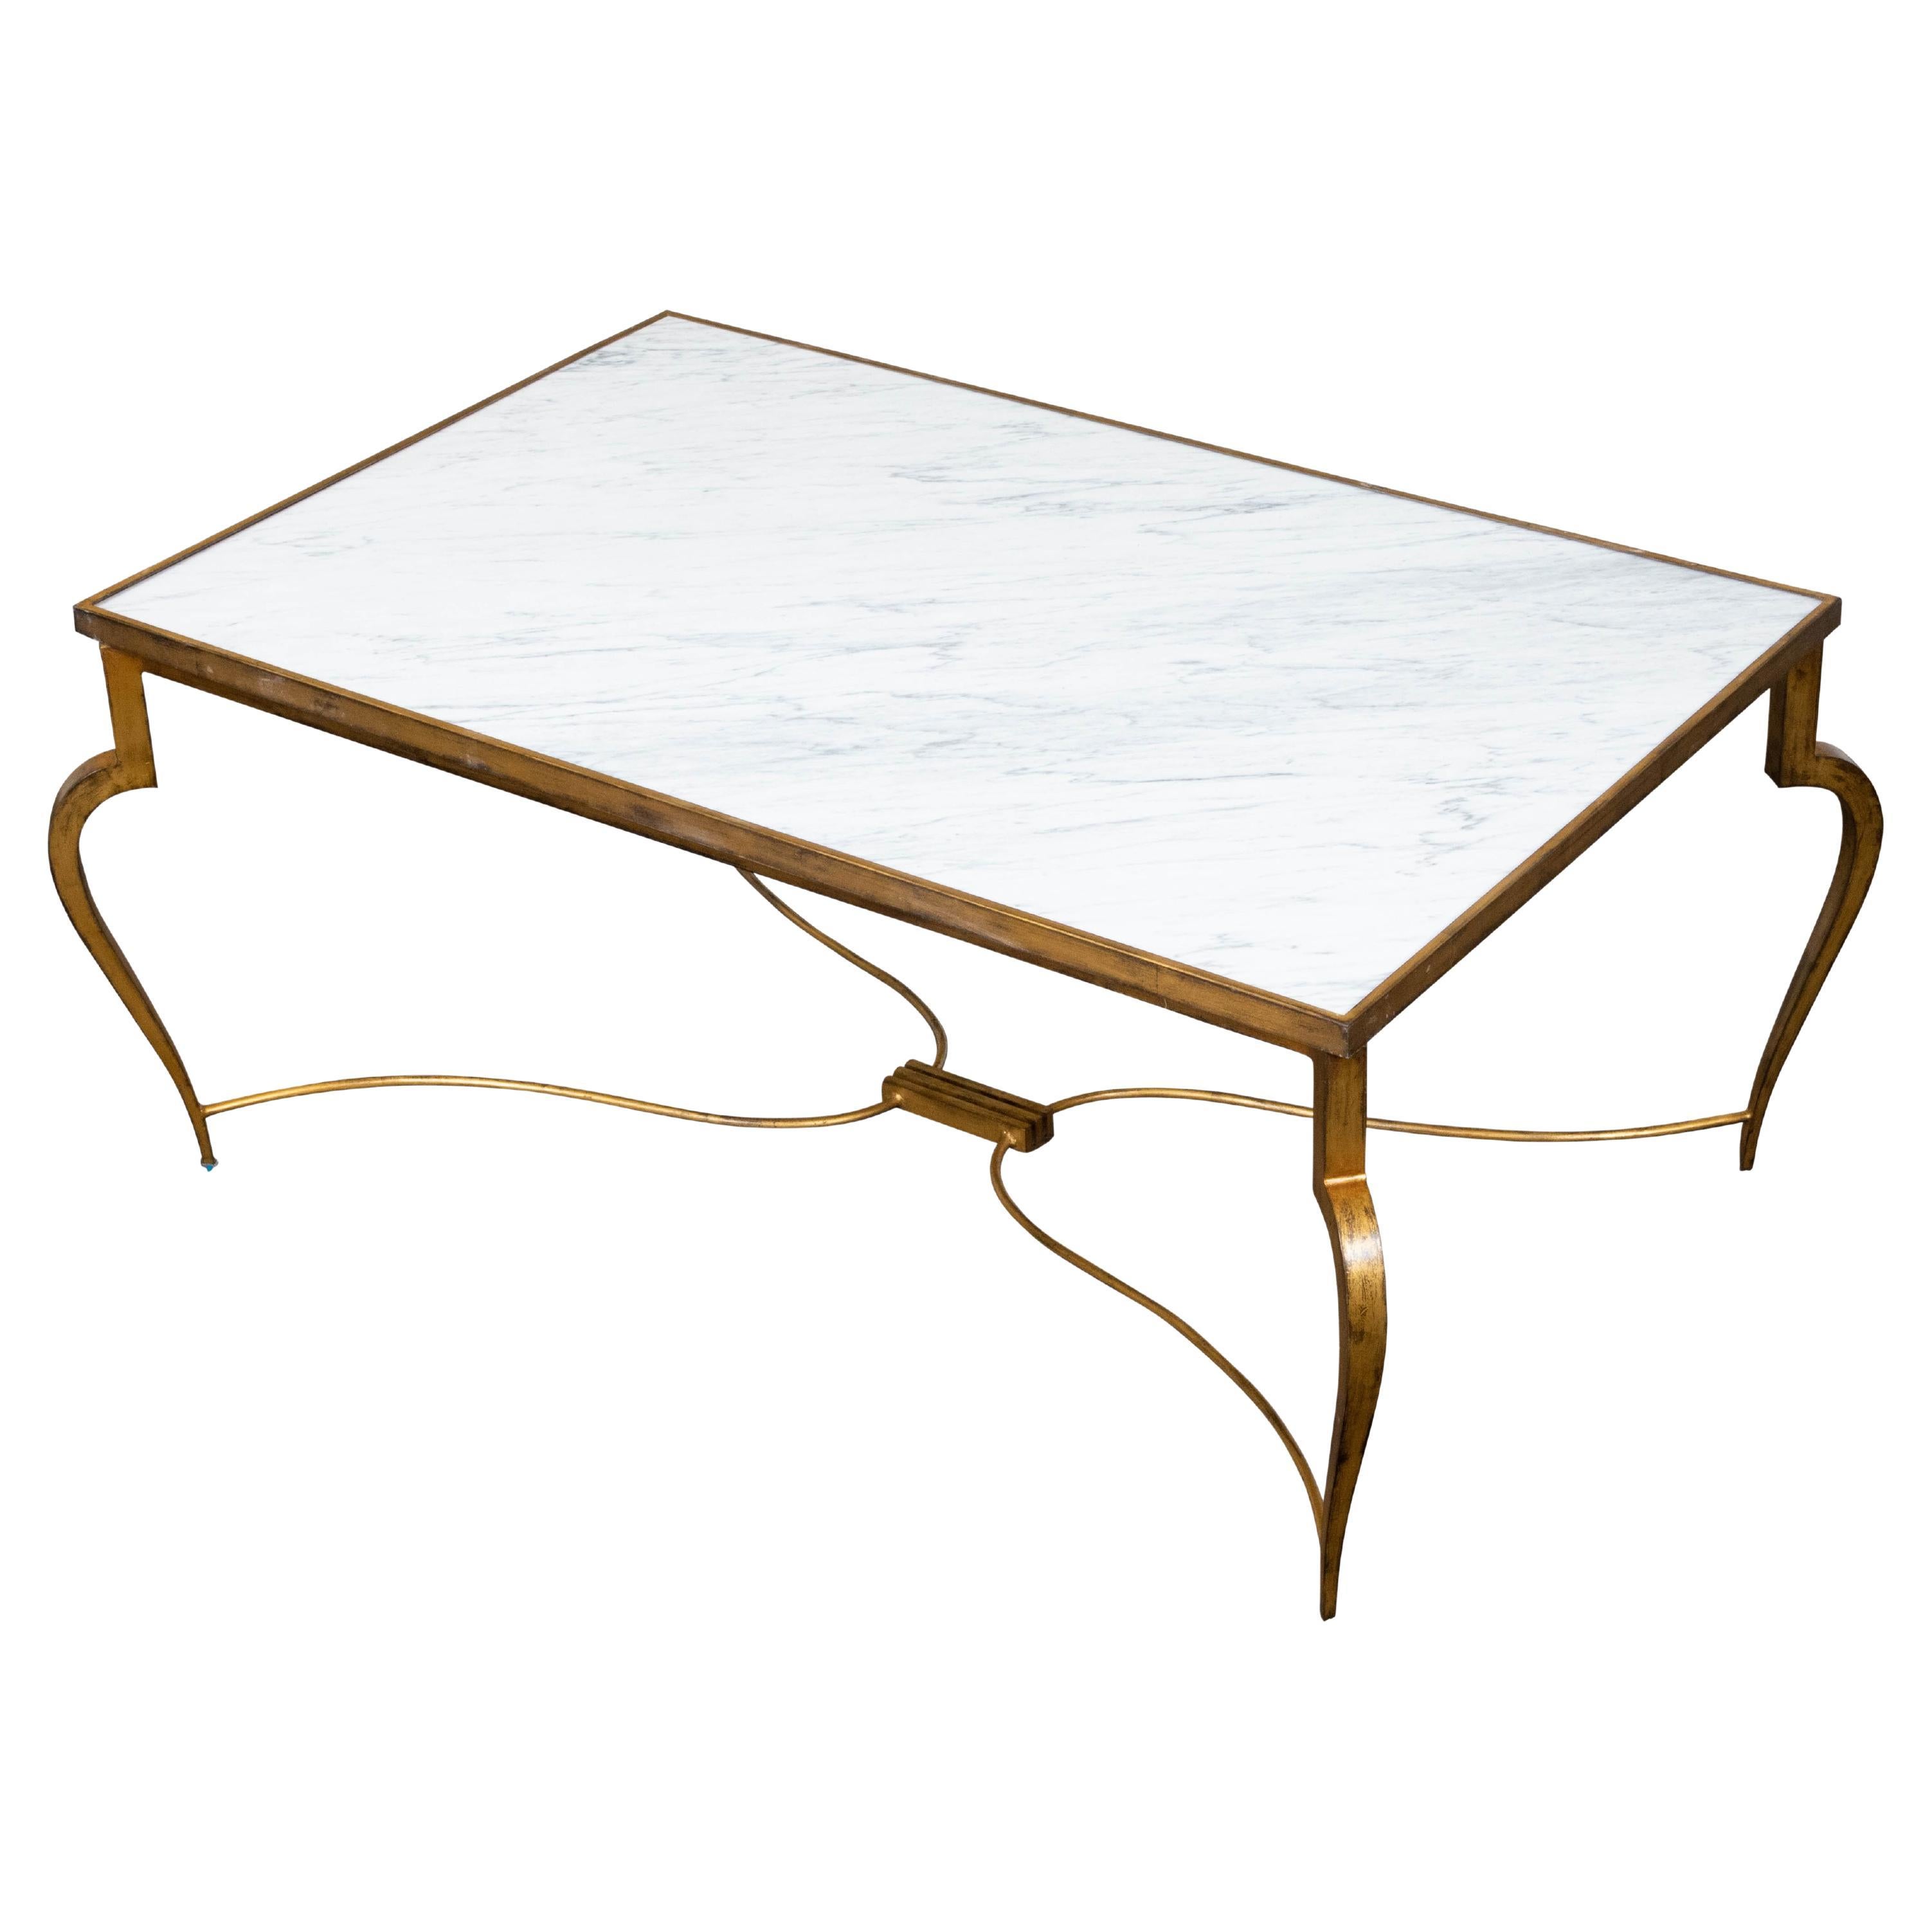 French Midcentury Gilt Iron Coffee Table with White Marble Top and Cabriole Legs For Sale